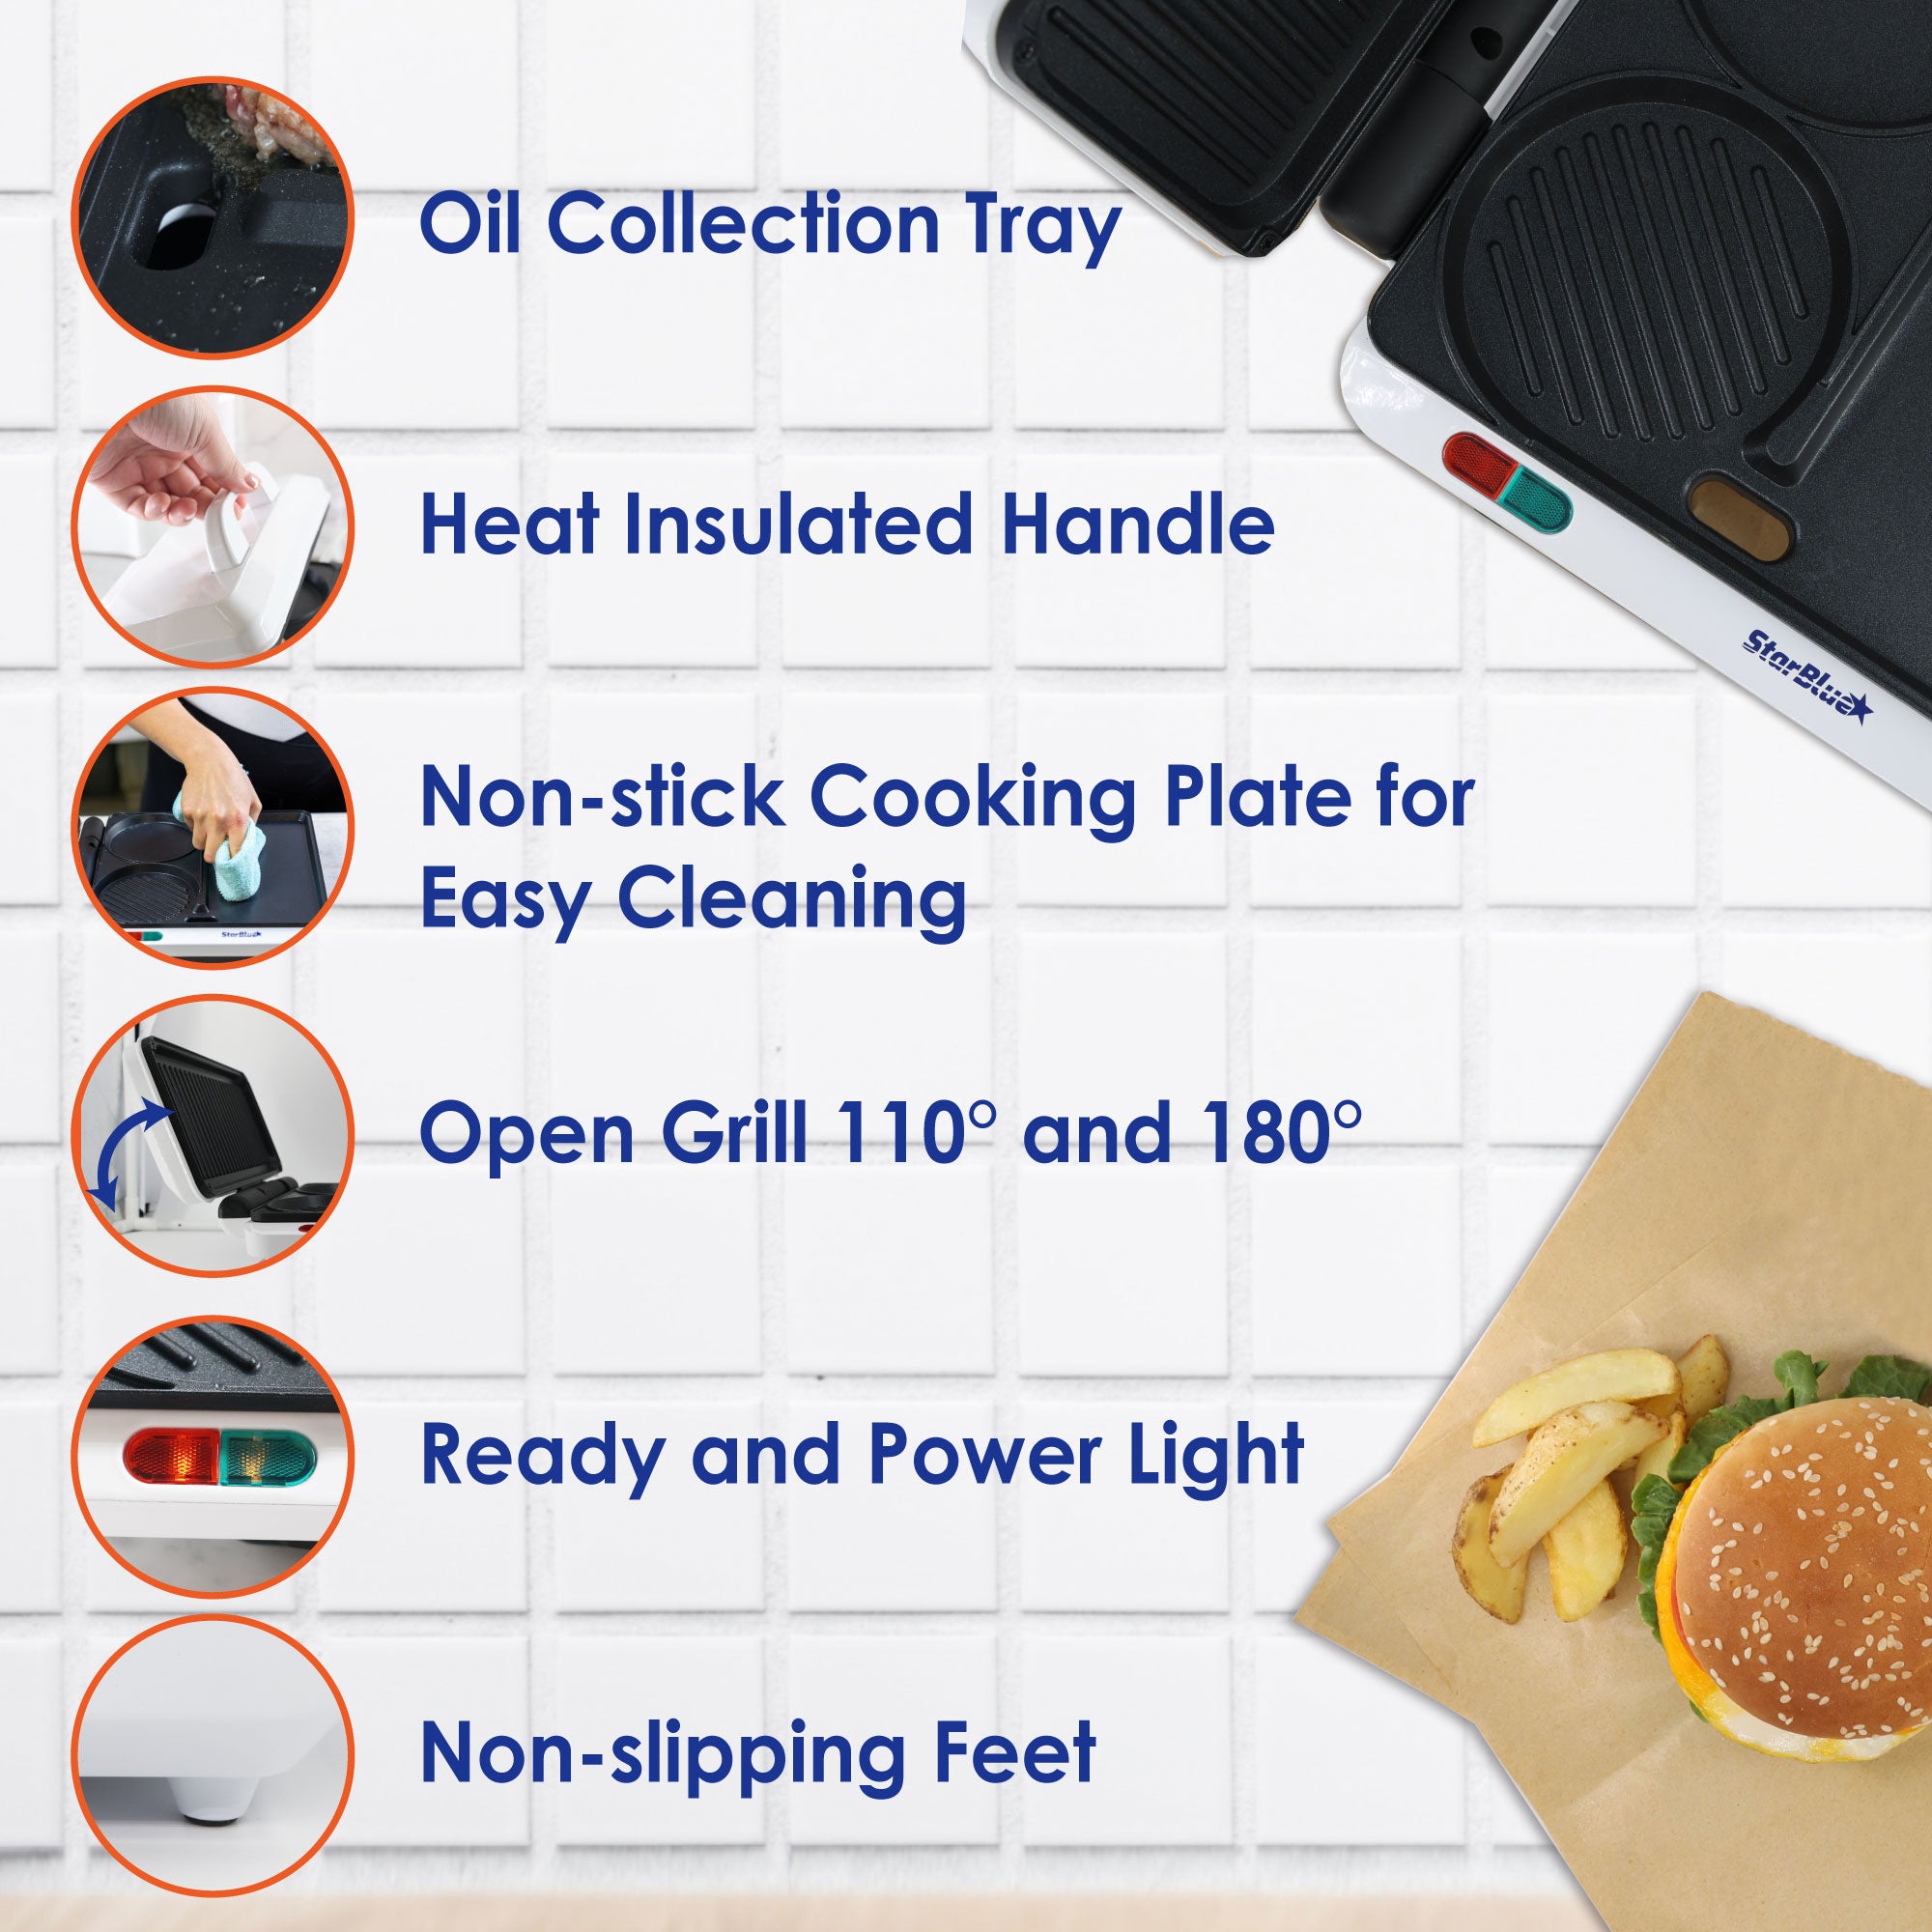 Hamburger Grill Maker by StarBlue with FREE Burger Press and Recipes eBook  - Portable and Multipurpose Machine AC120V 60HZ 1000W